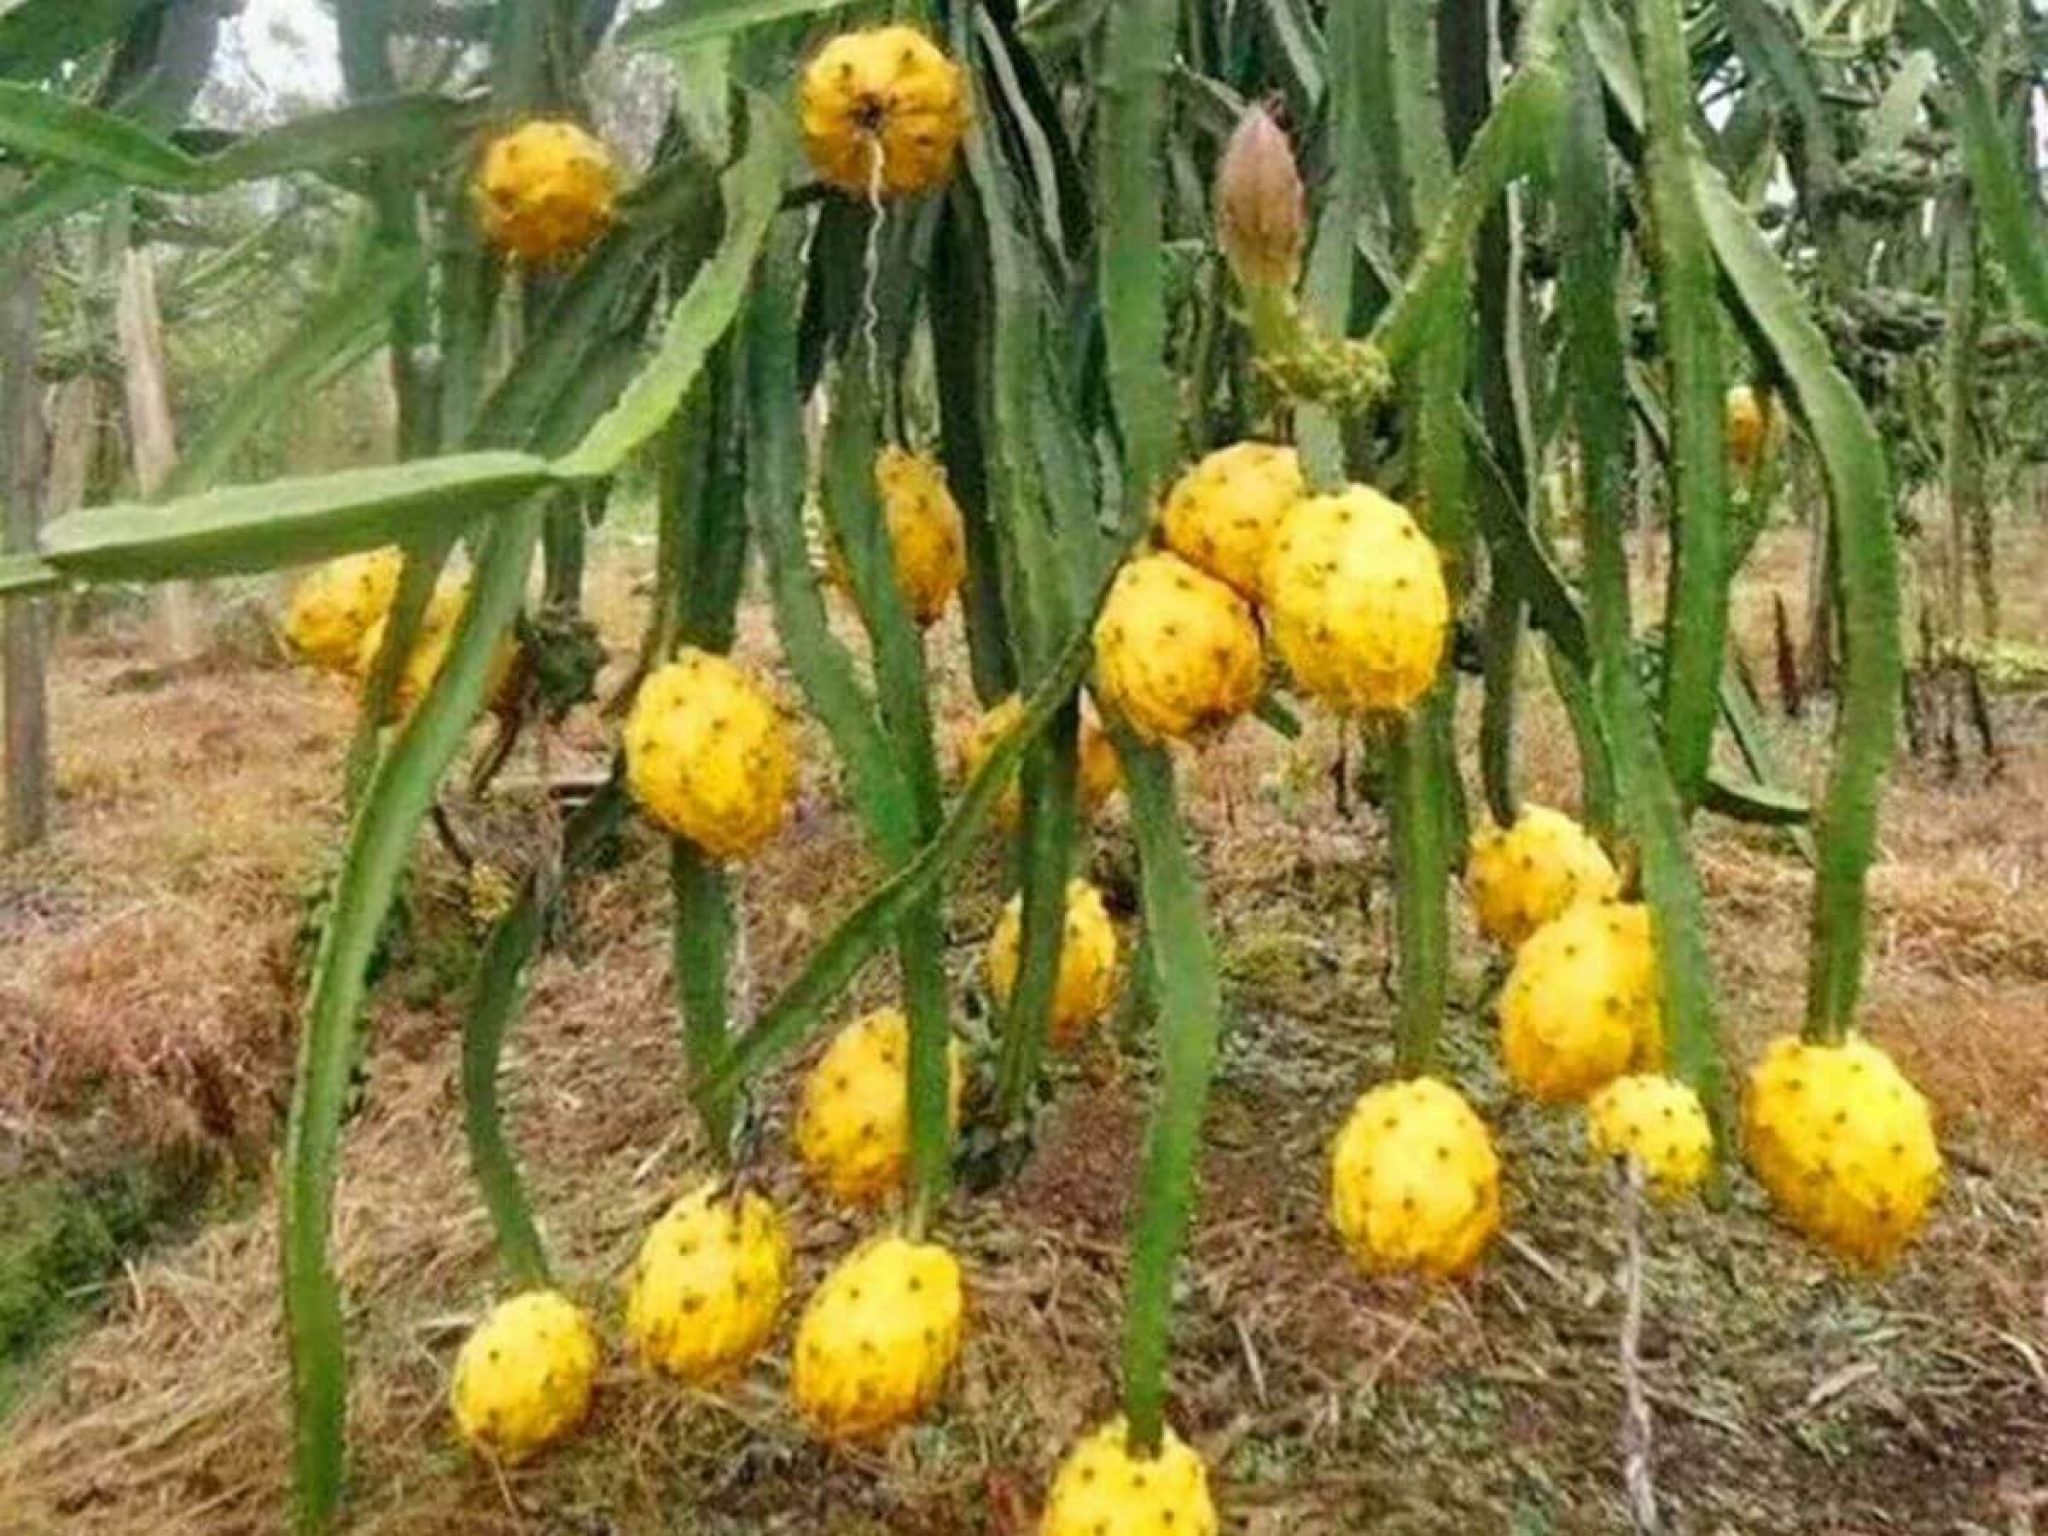 The Best Dragon Fruit Trees For Sale - 2022